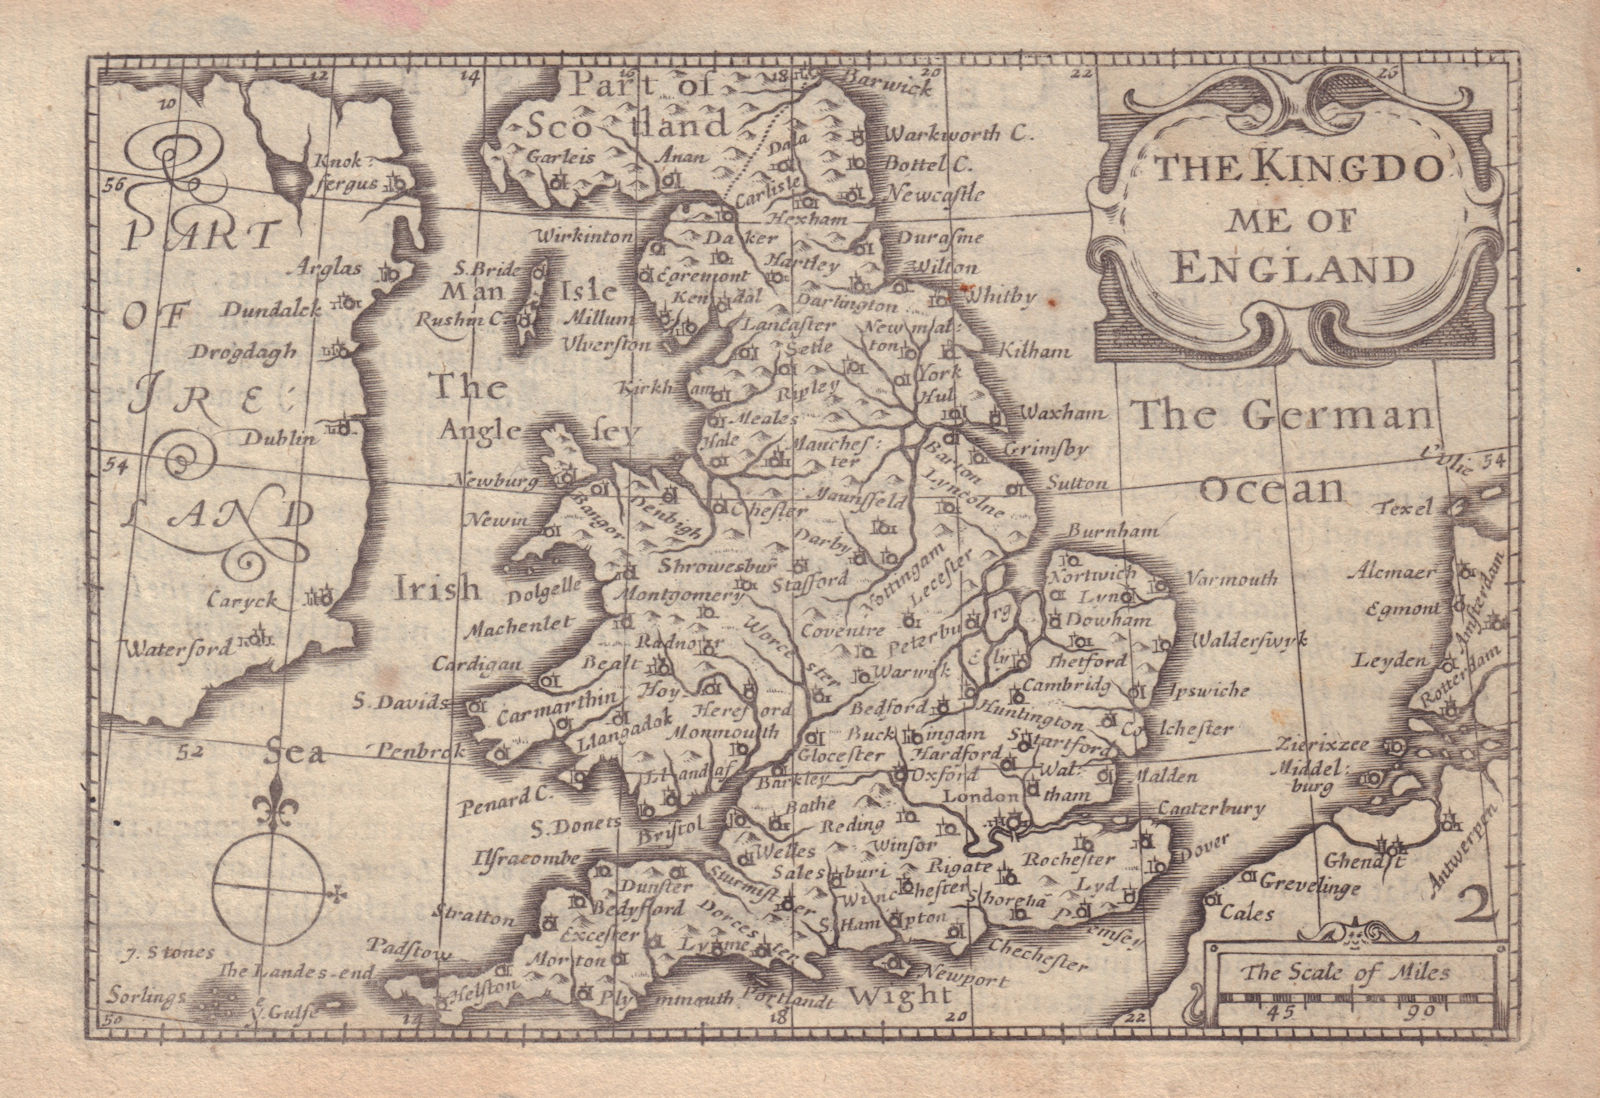 Associate Product The Kingdome of England by van den Keere. "Speed miniature" 1632 old map